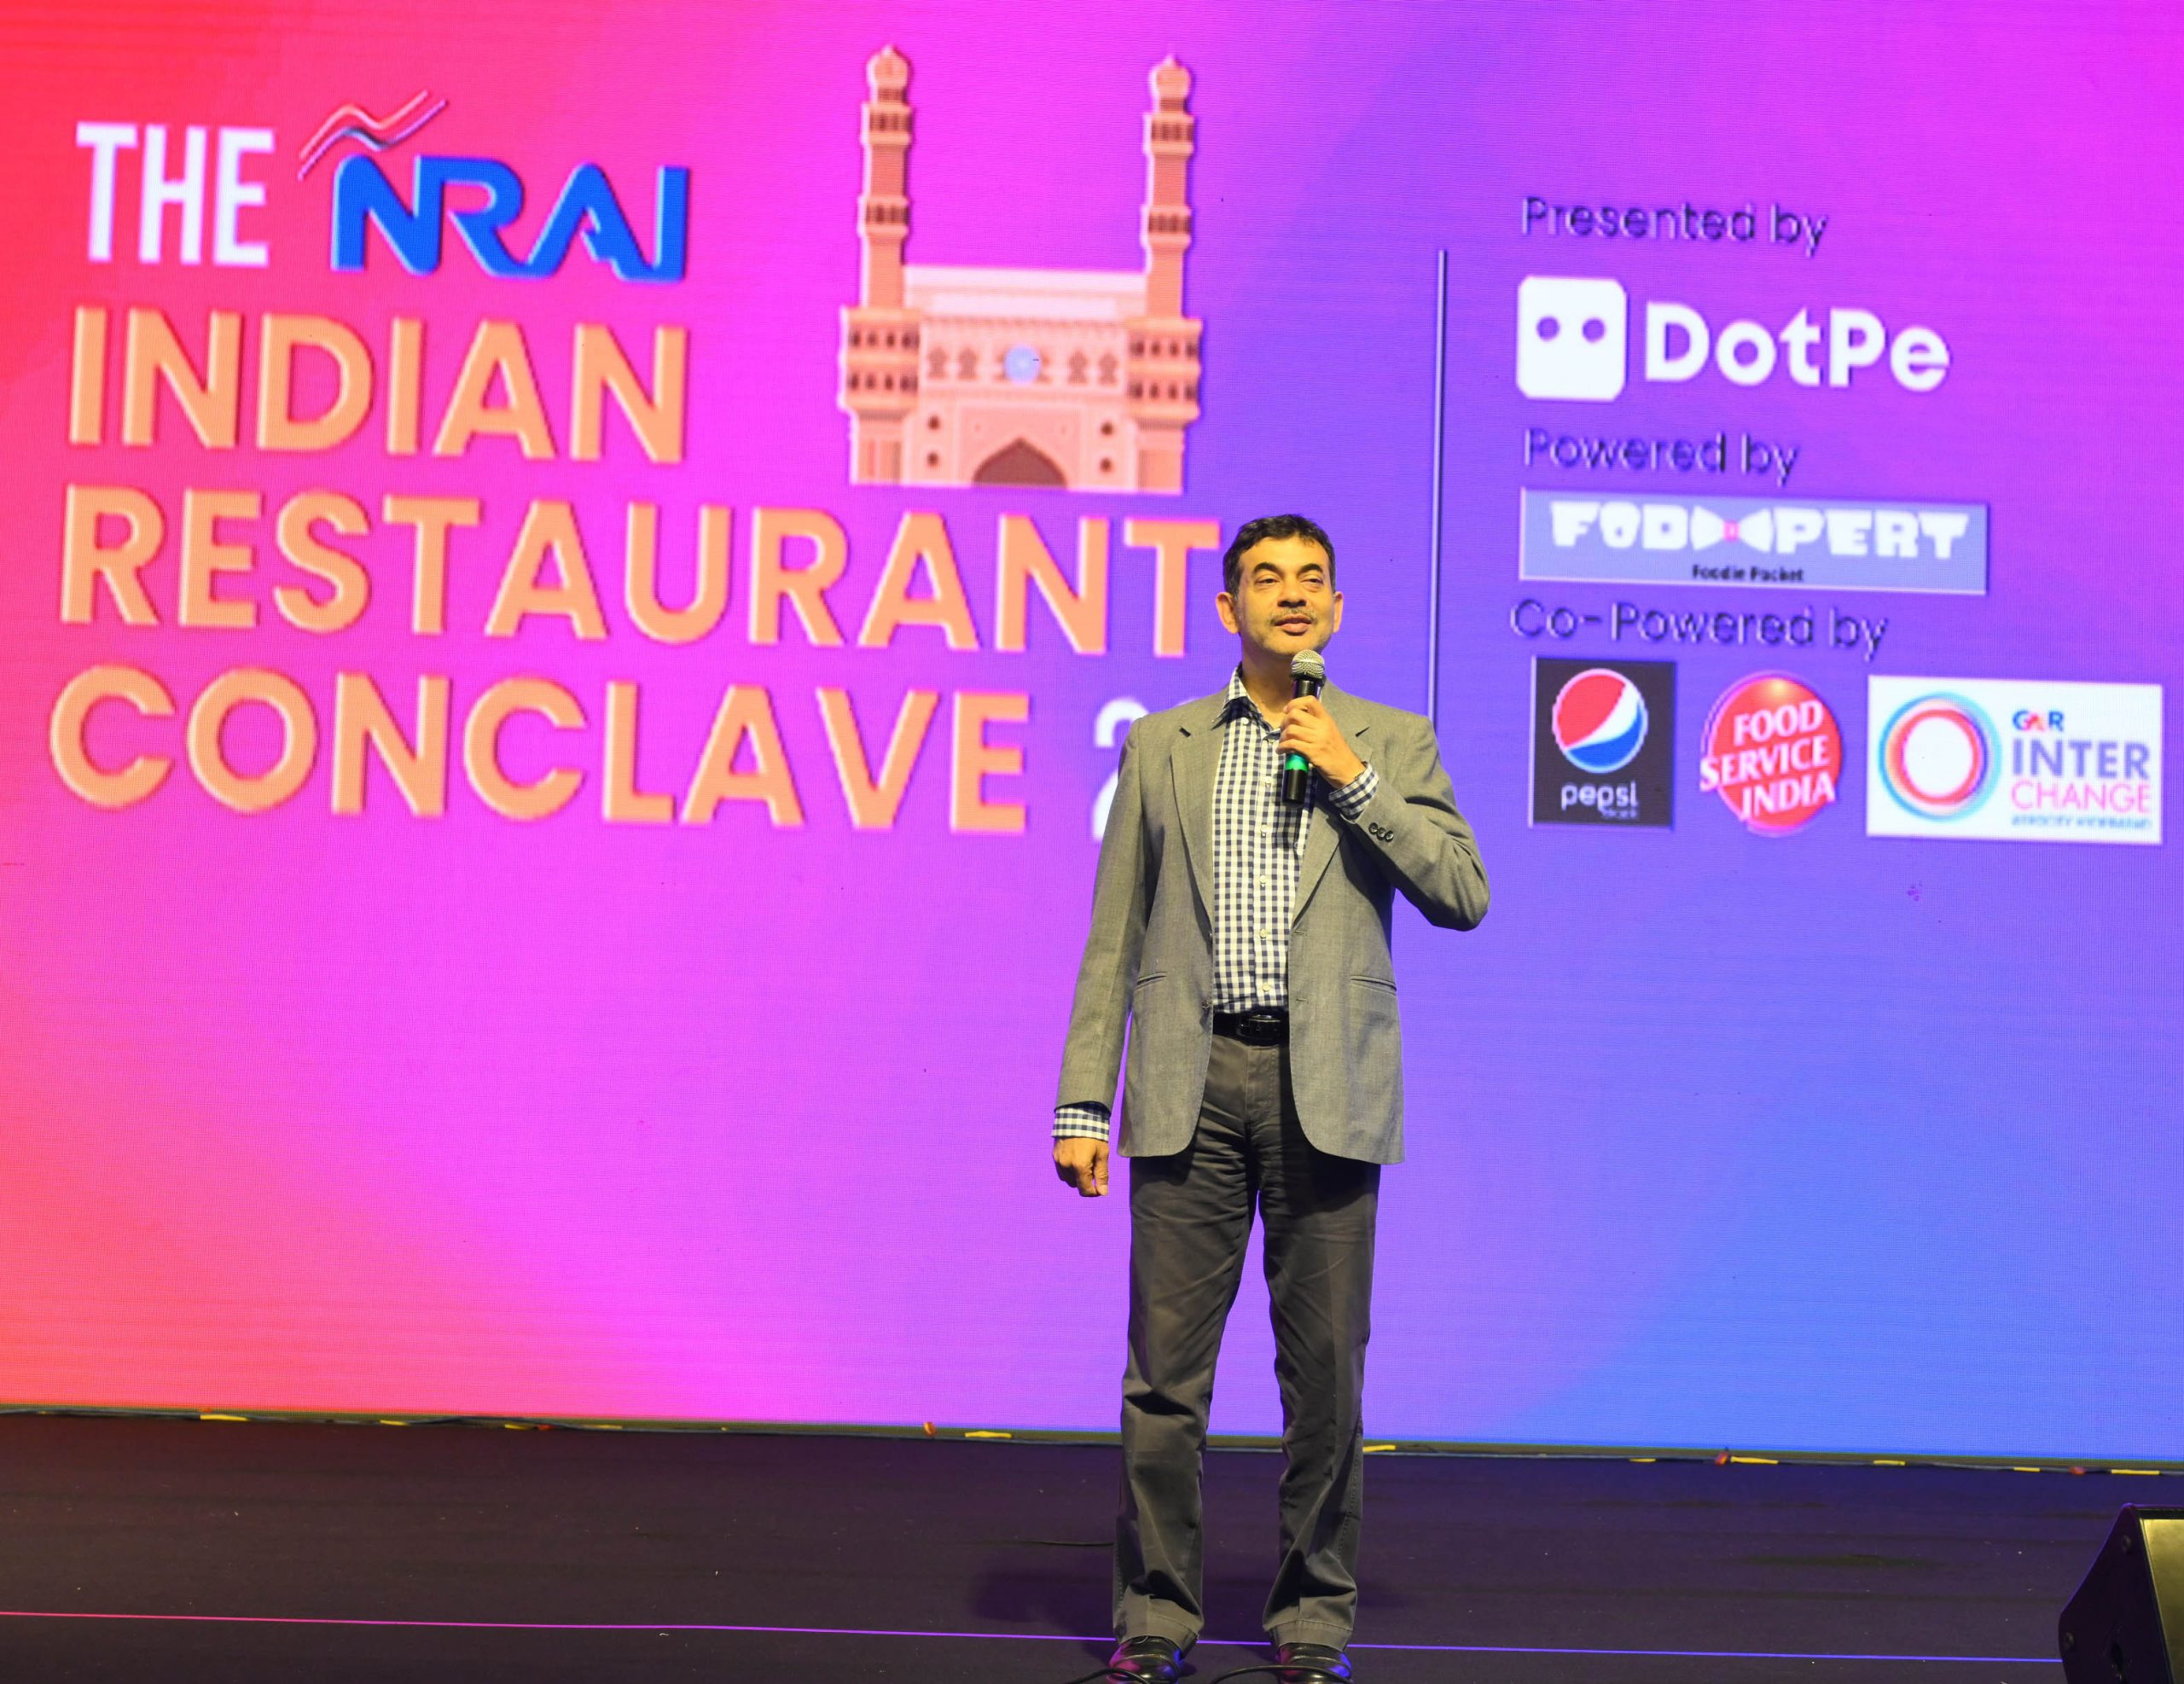 Chief guest Shri Jayesh Ranjan, IAS, Principal Secretary - l & C & IT, Govt. of Telangana; addressing the gathering at the India’s Largest Restaurant Industry Conclave, The NRAI Indian Restaurant Conclave 2022 at HICC, today.